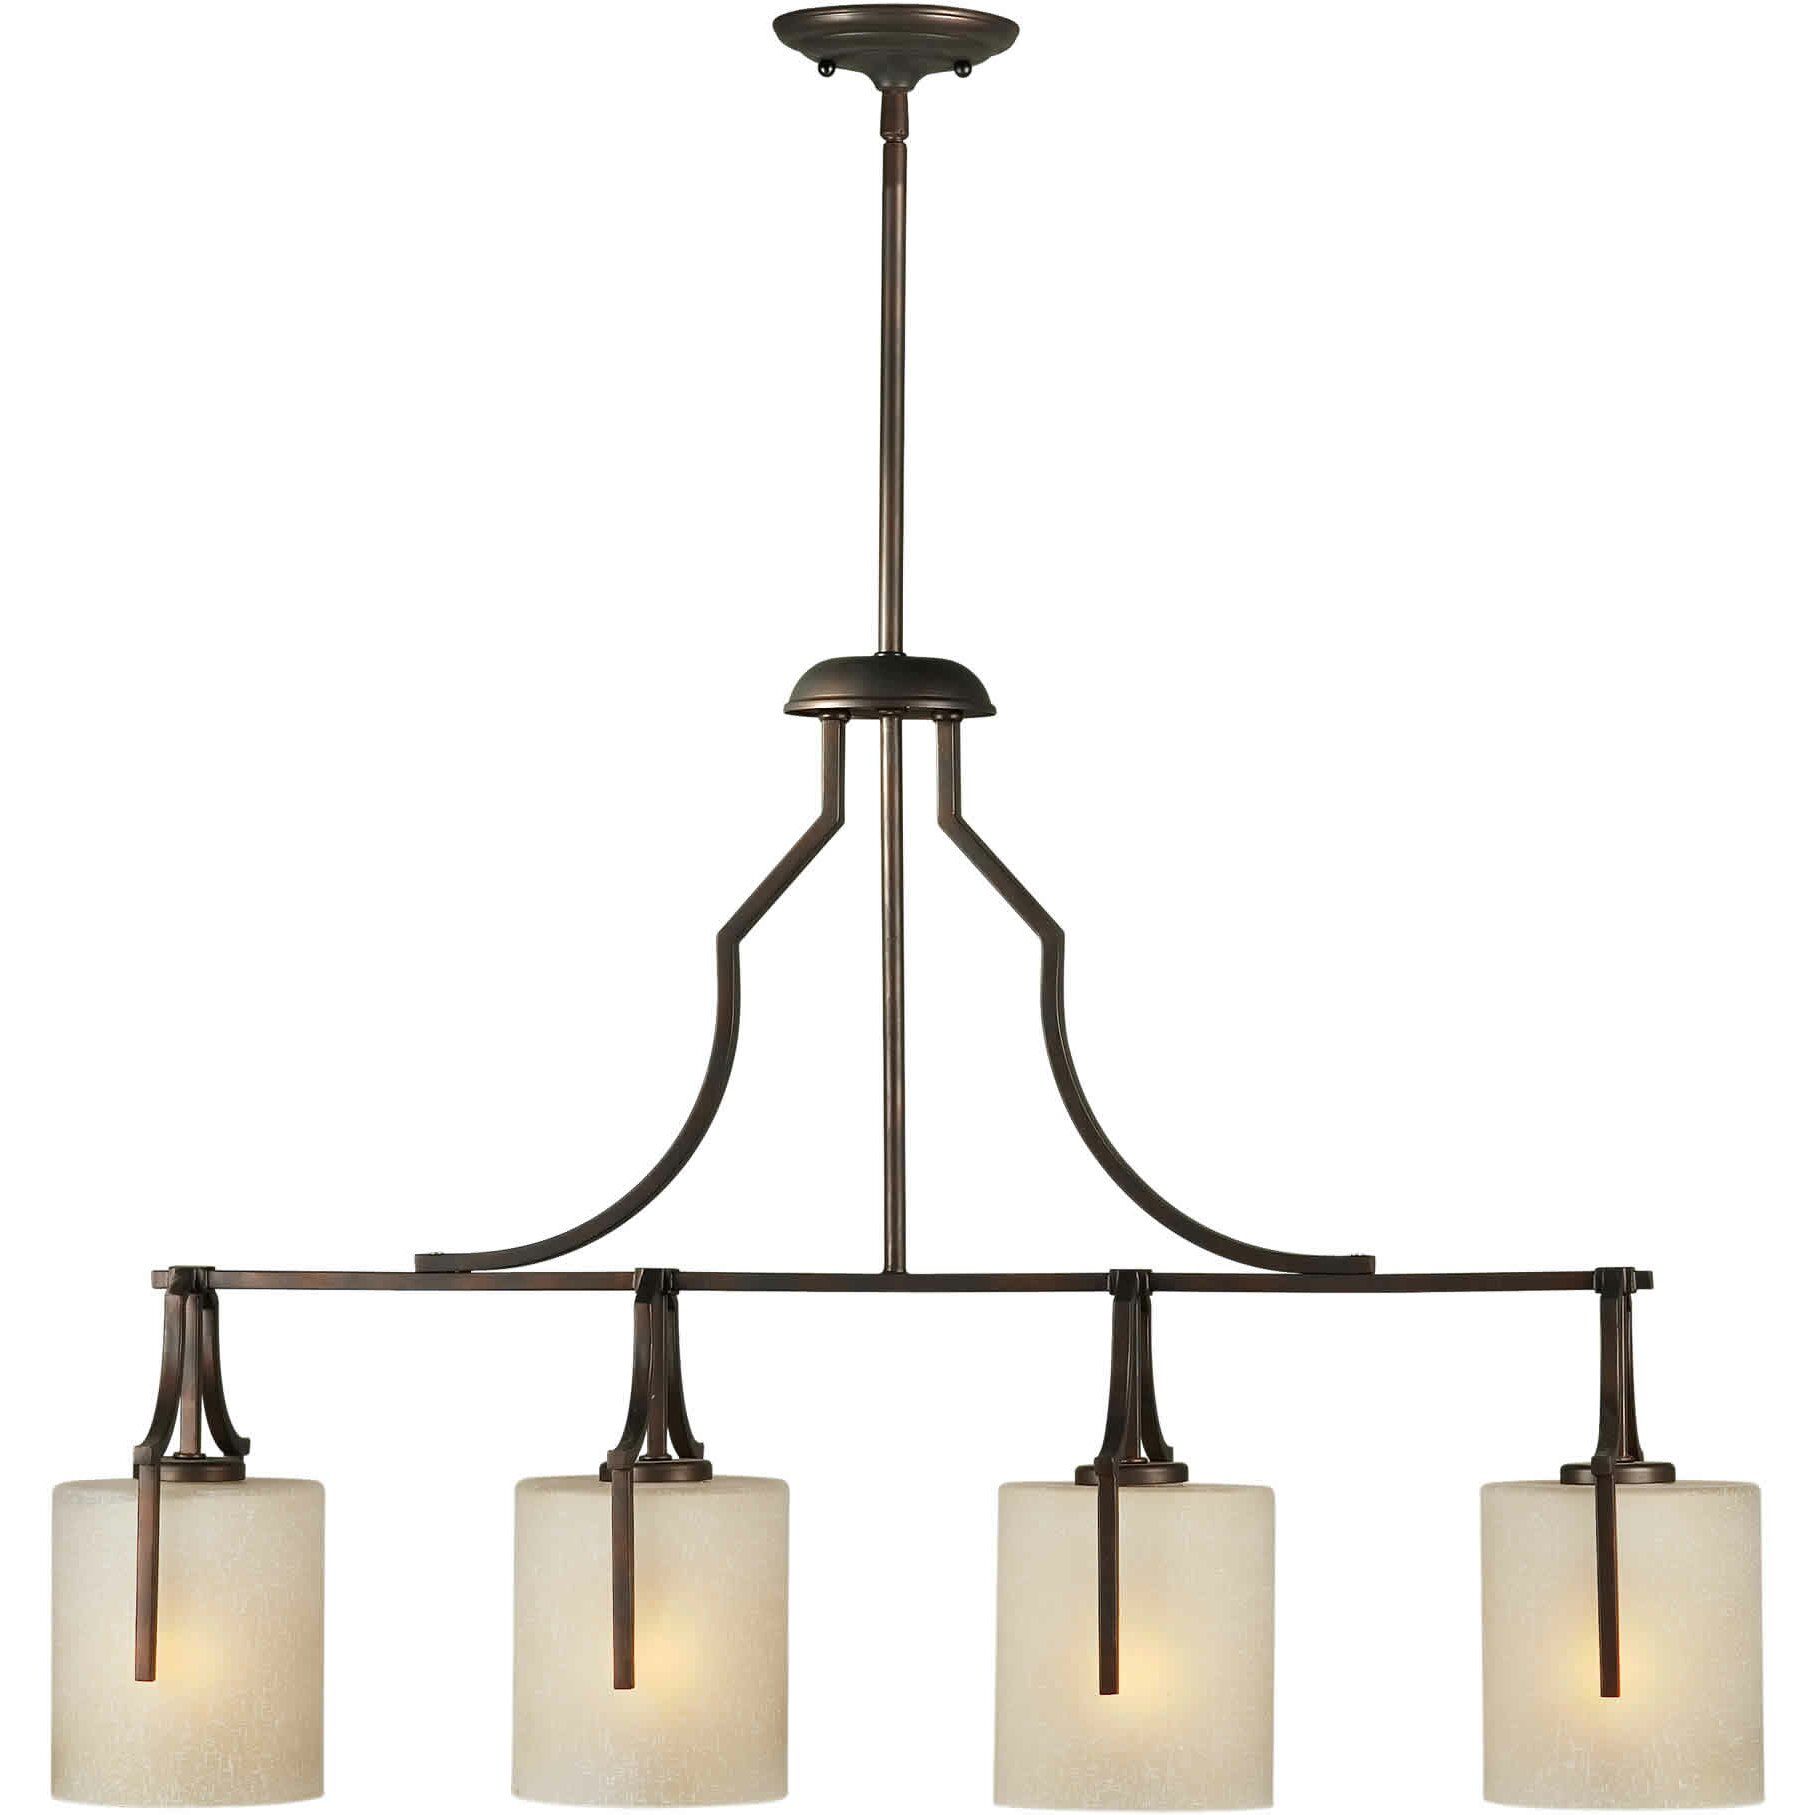 Forte Lighting 4 Light Kitchen Island Pendant & Reviews With Bronze Kitchen Island Chandeliers (View 3 of 15)